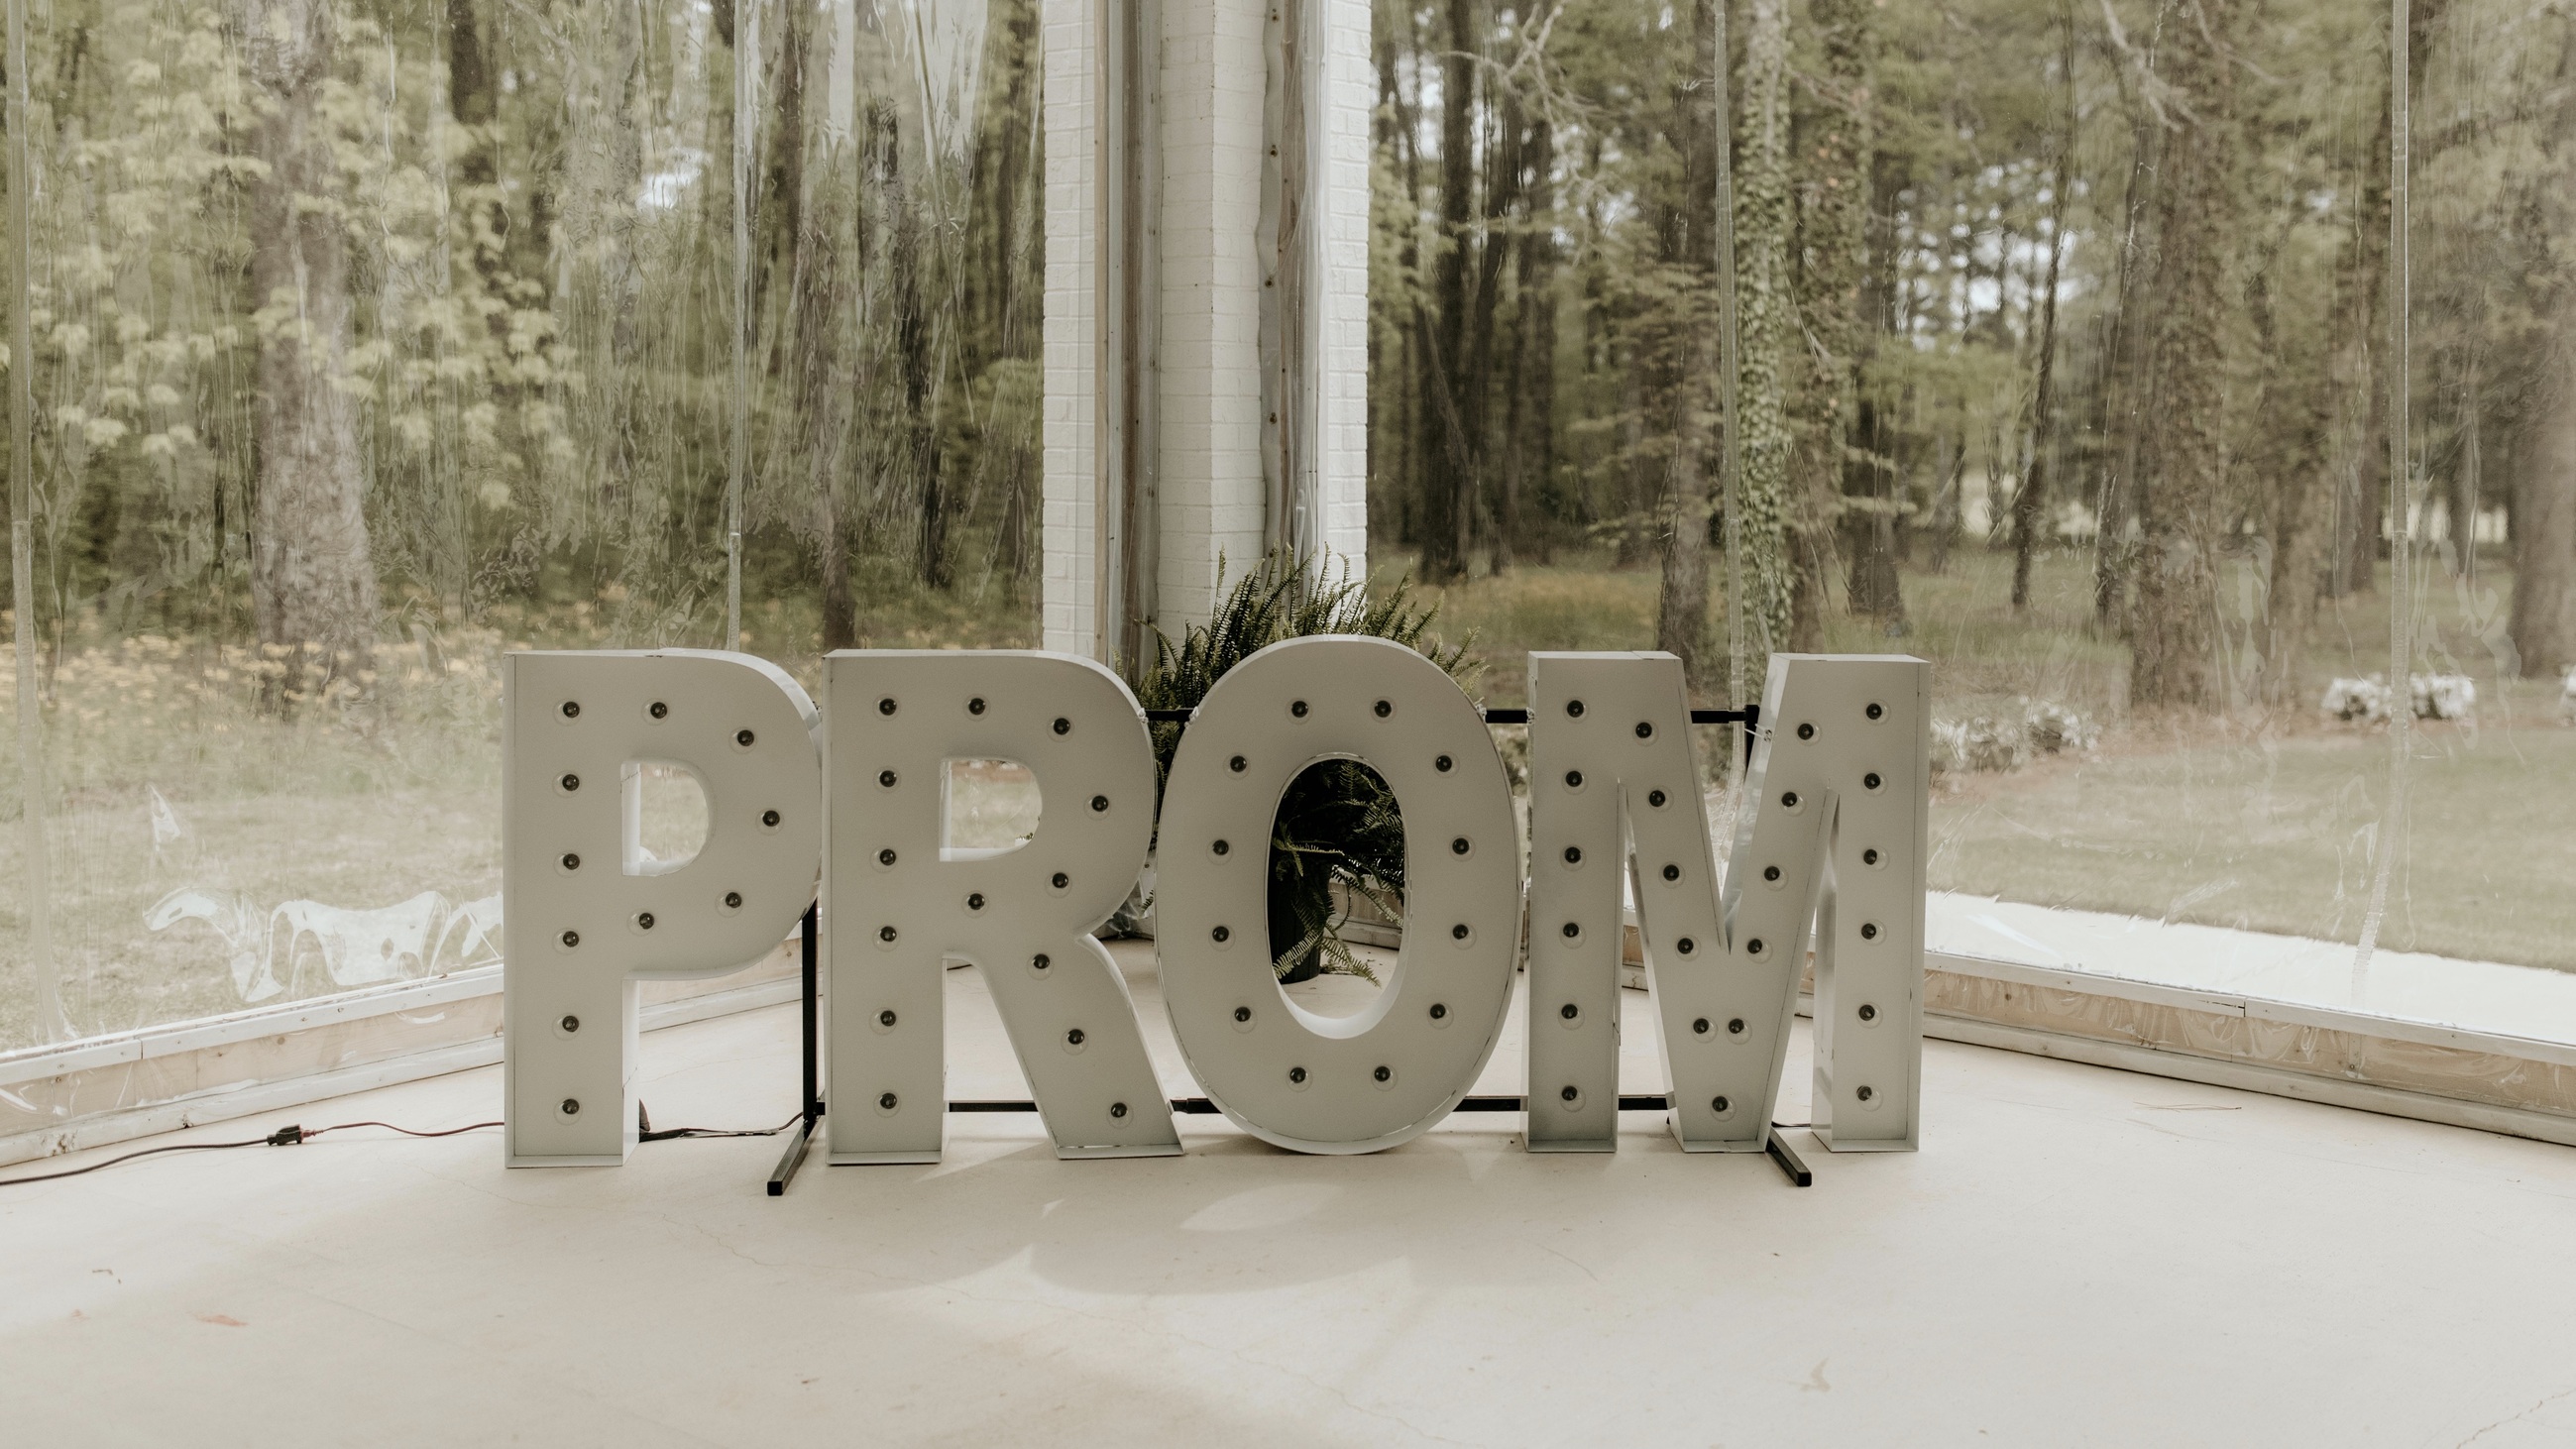 14 Fun Ways to Ask Your Date to Prom Desktop Image